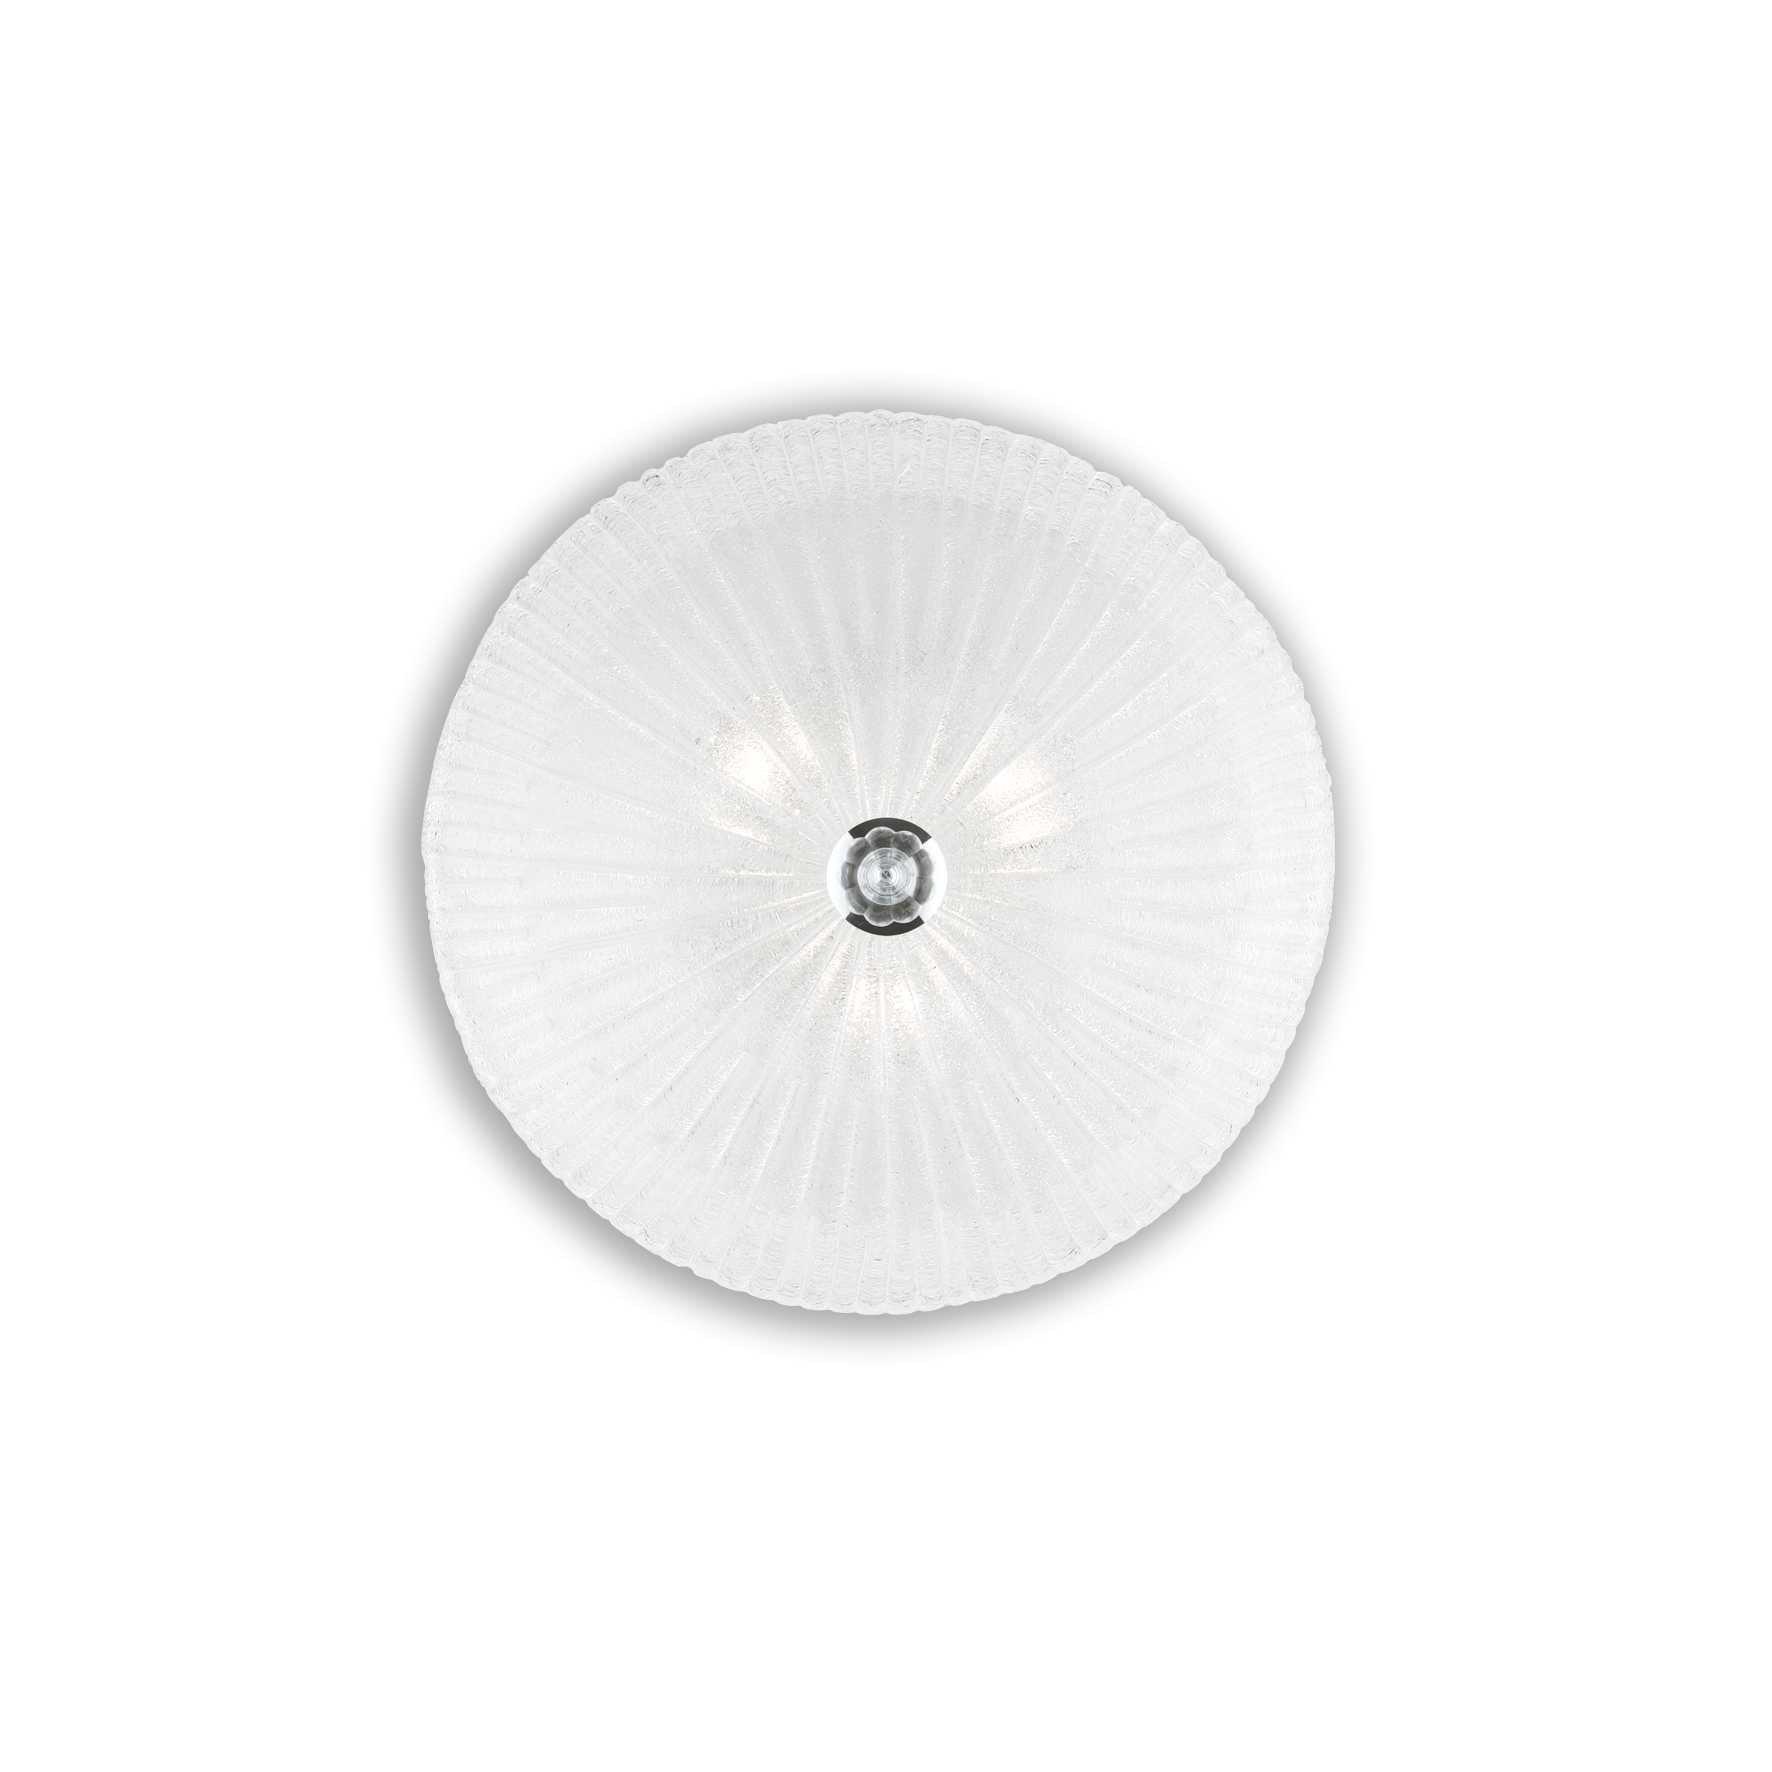 Shell 3 Light Indoor Flush Wall Ceiling Light Chrome with Clear Glass E27